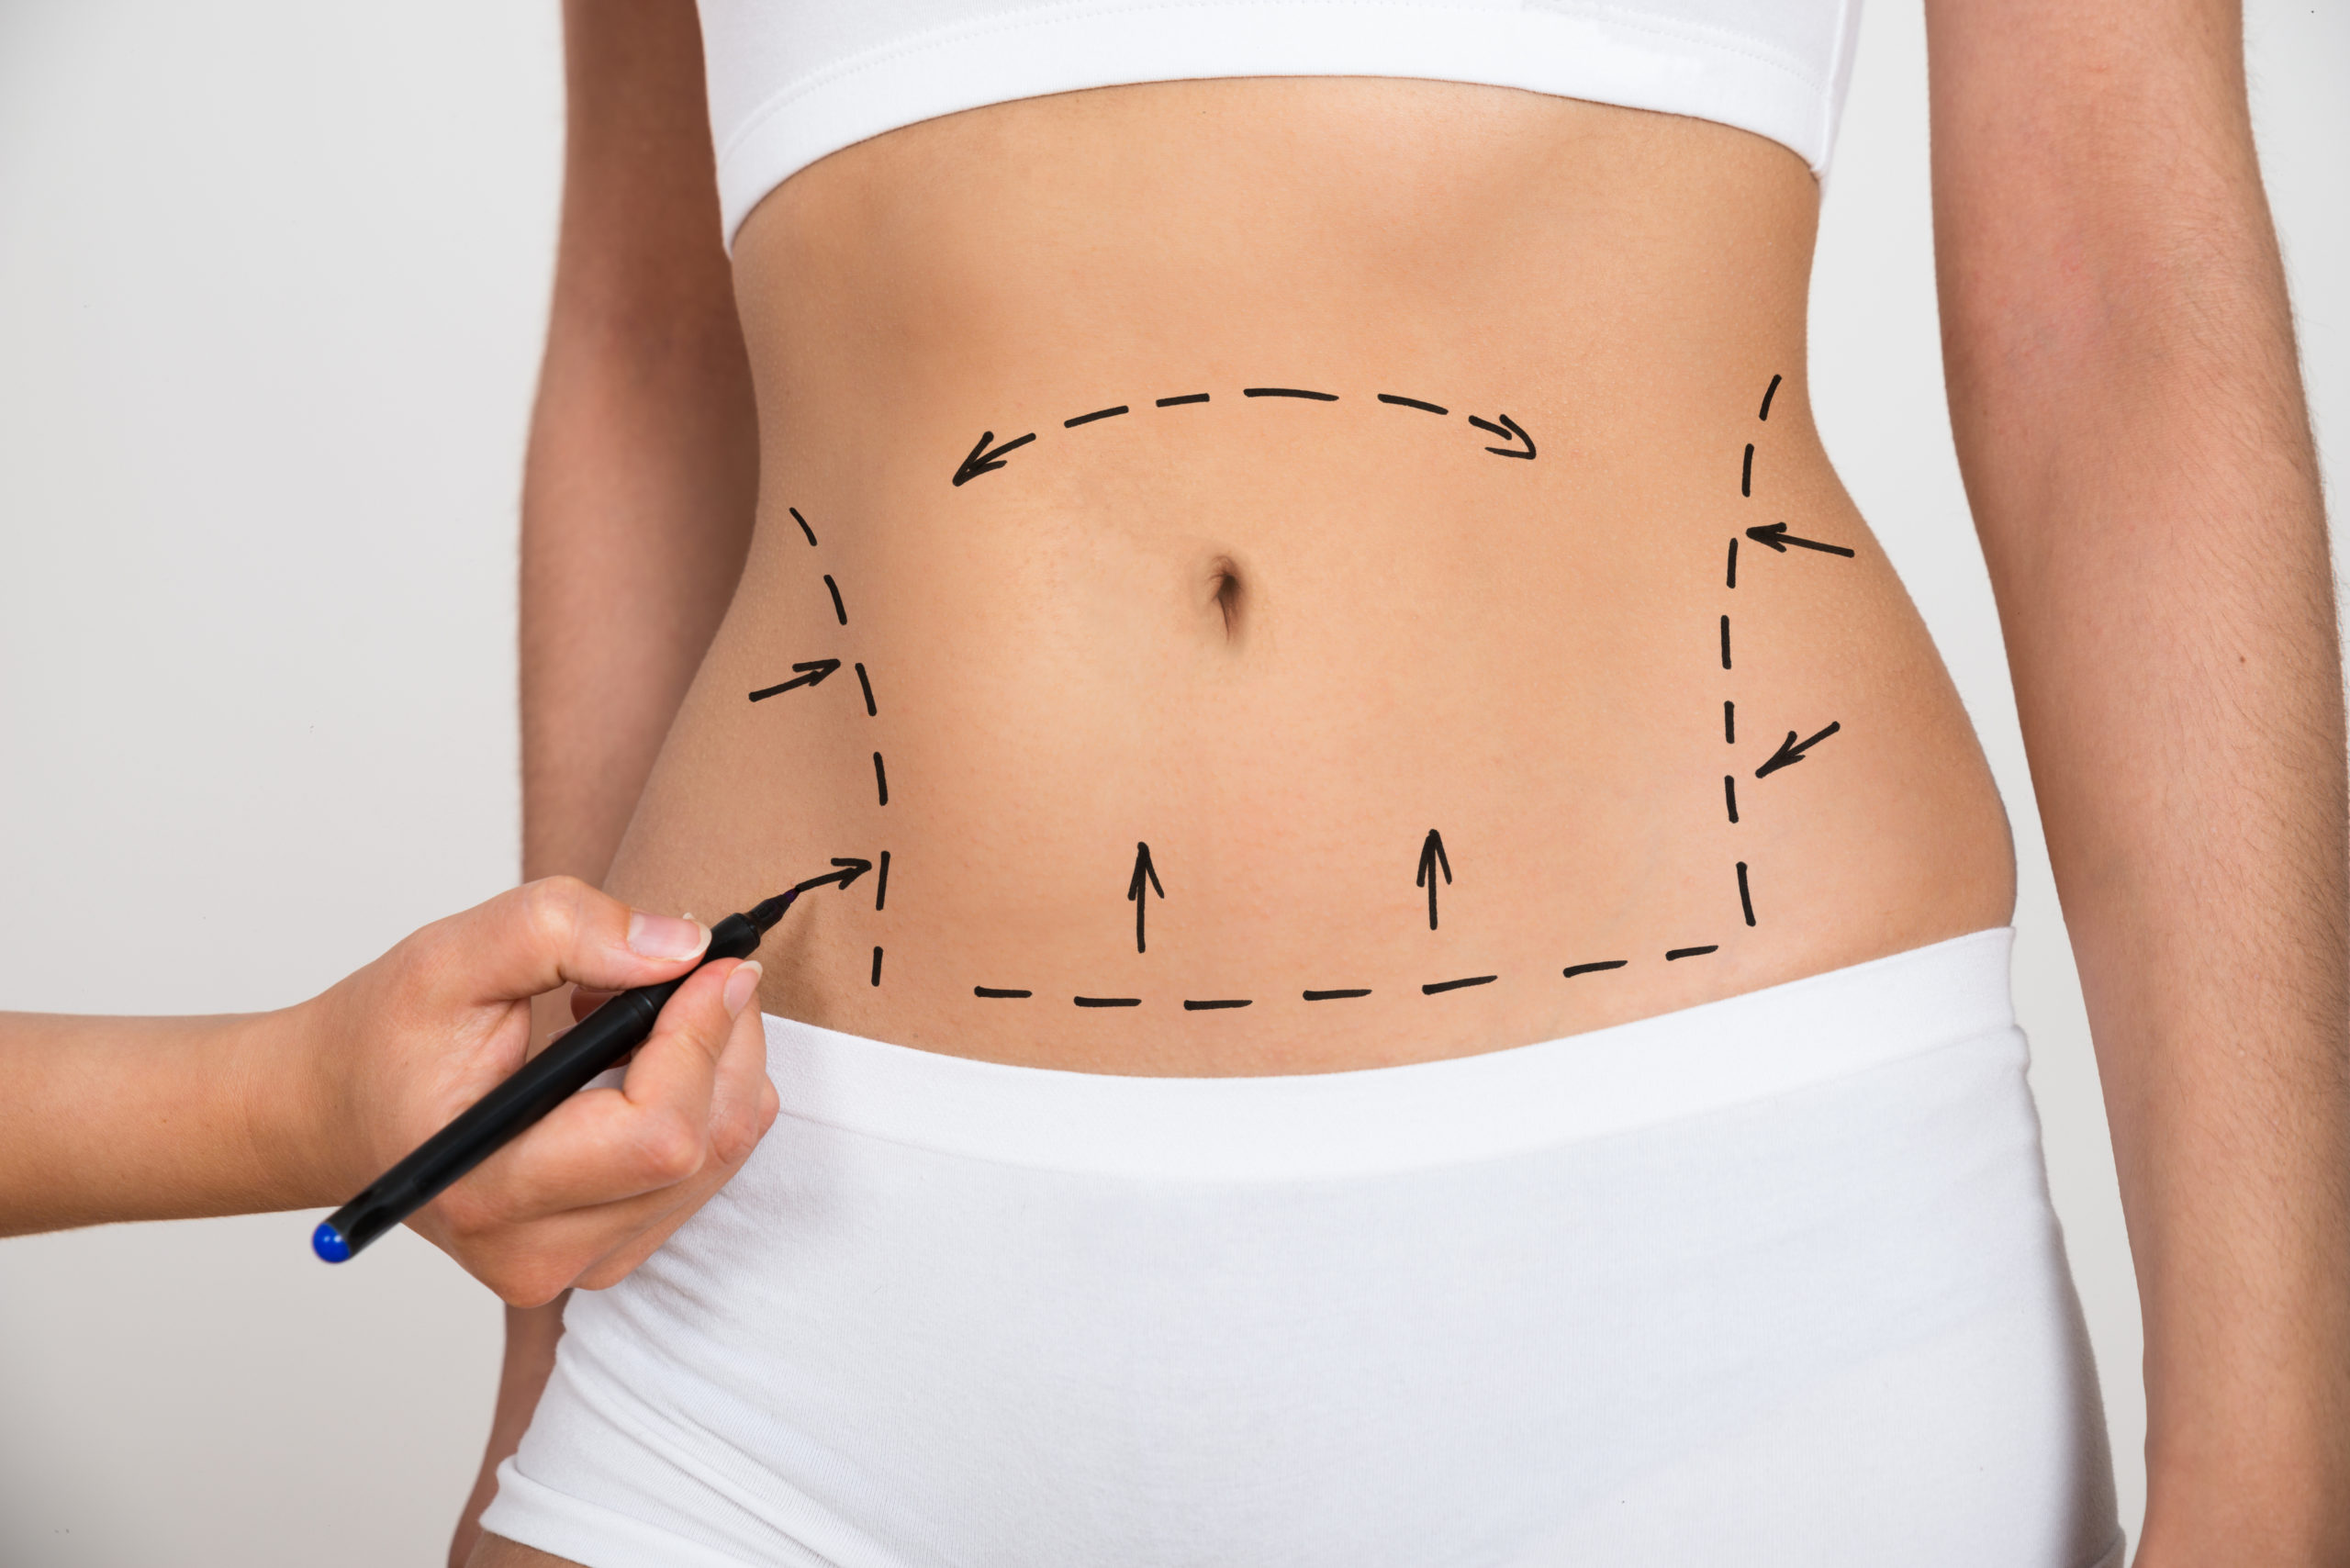 Body Contouring vs. Plastic Surgery: Which Is The Best Option For You?